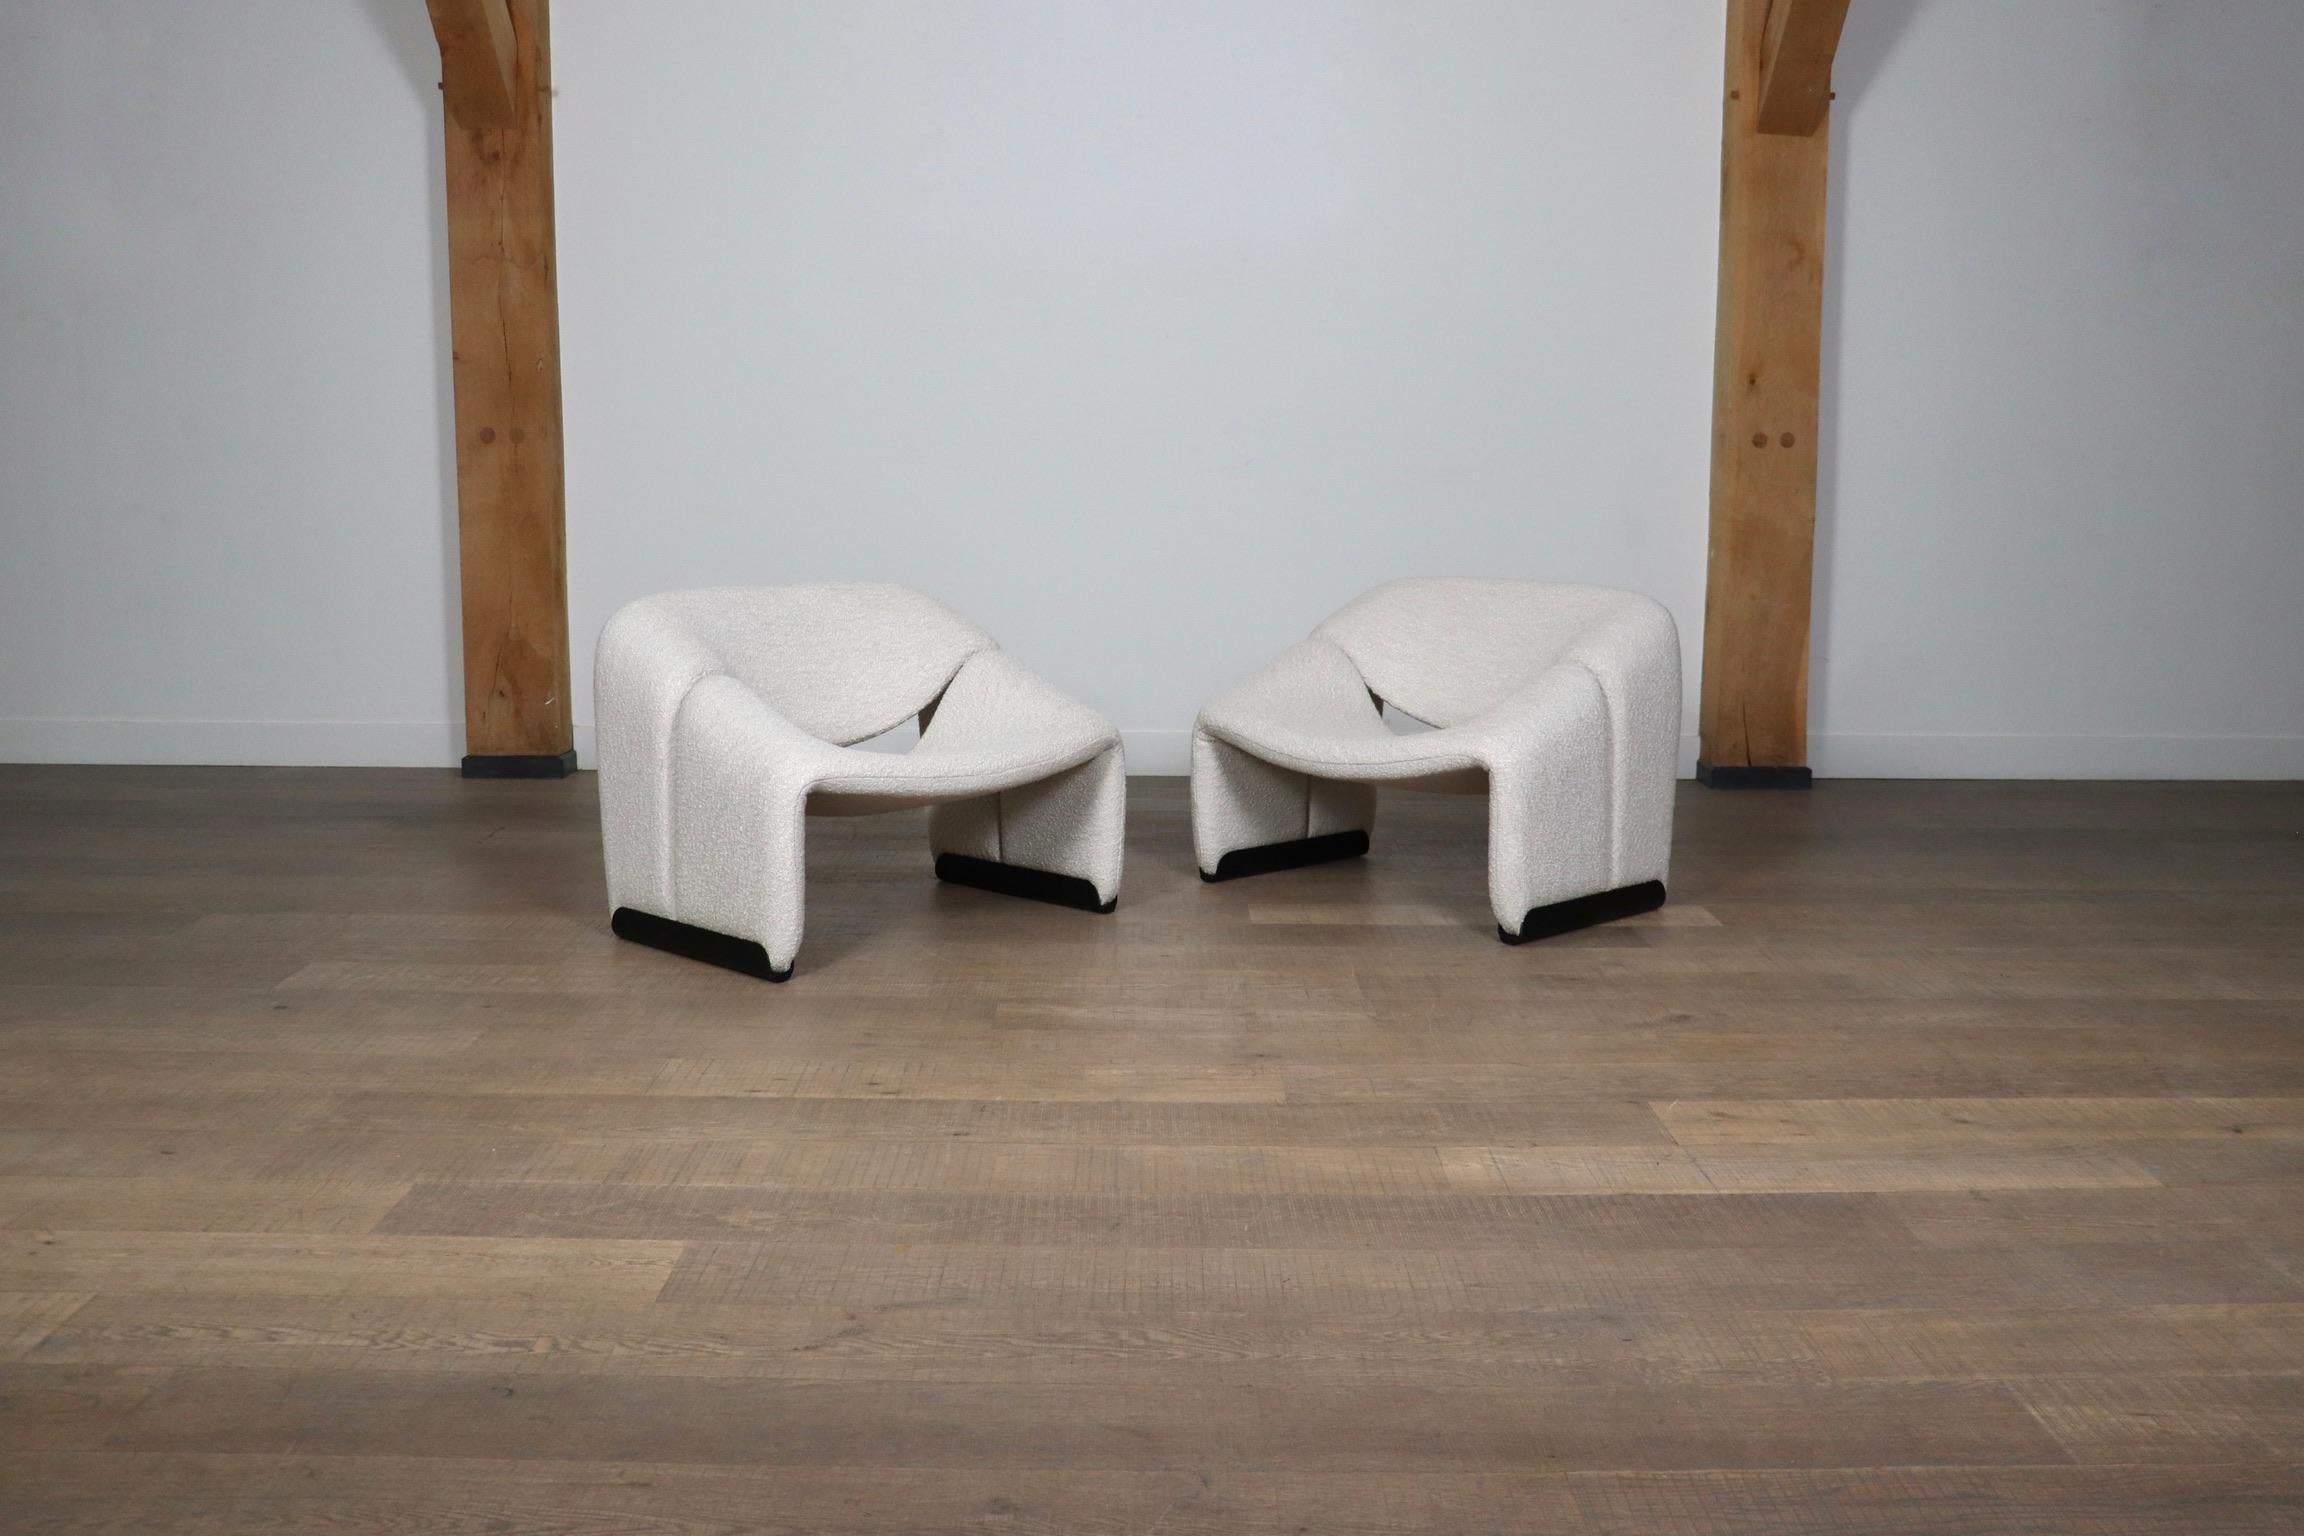 Fantastic pair of Artifort F598 lounge chairs by Pierre Paulin in 1973. This model, is also known as ‘Groovy’ or ‘M chair’ following its characteristic shape. This stunning pair has been reupholstered in beautiful high quality bouclé, which has a